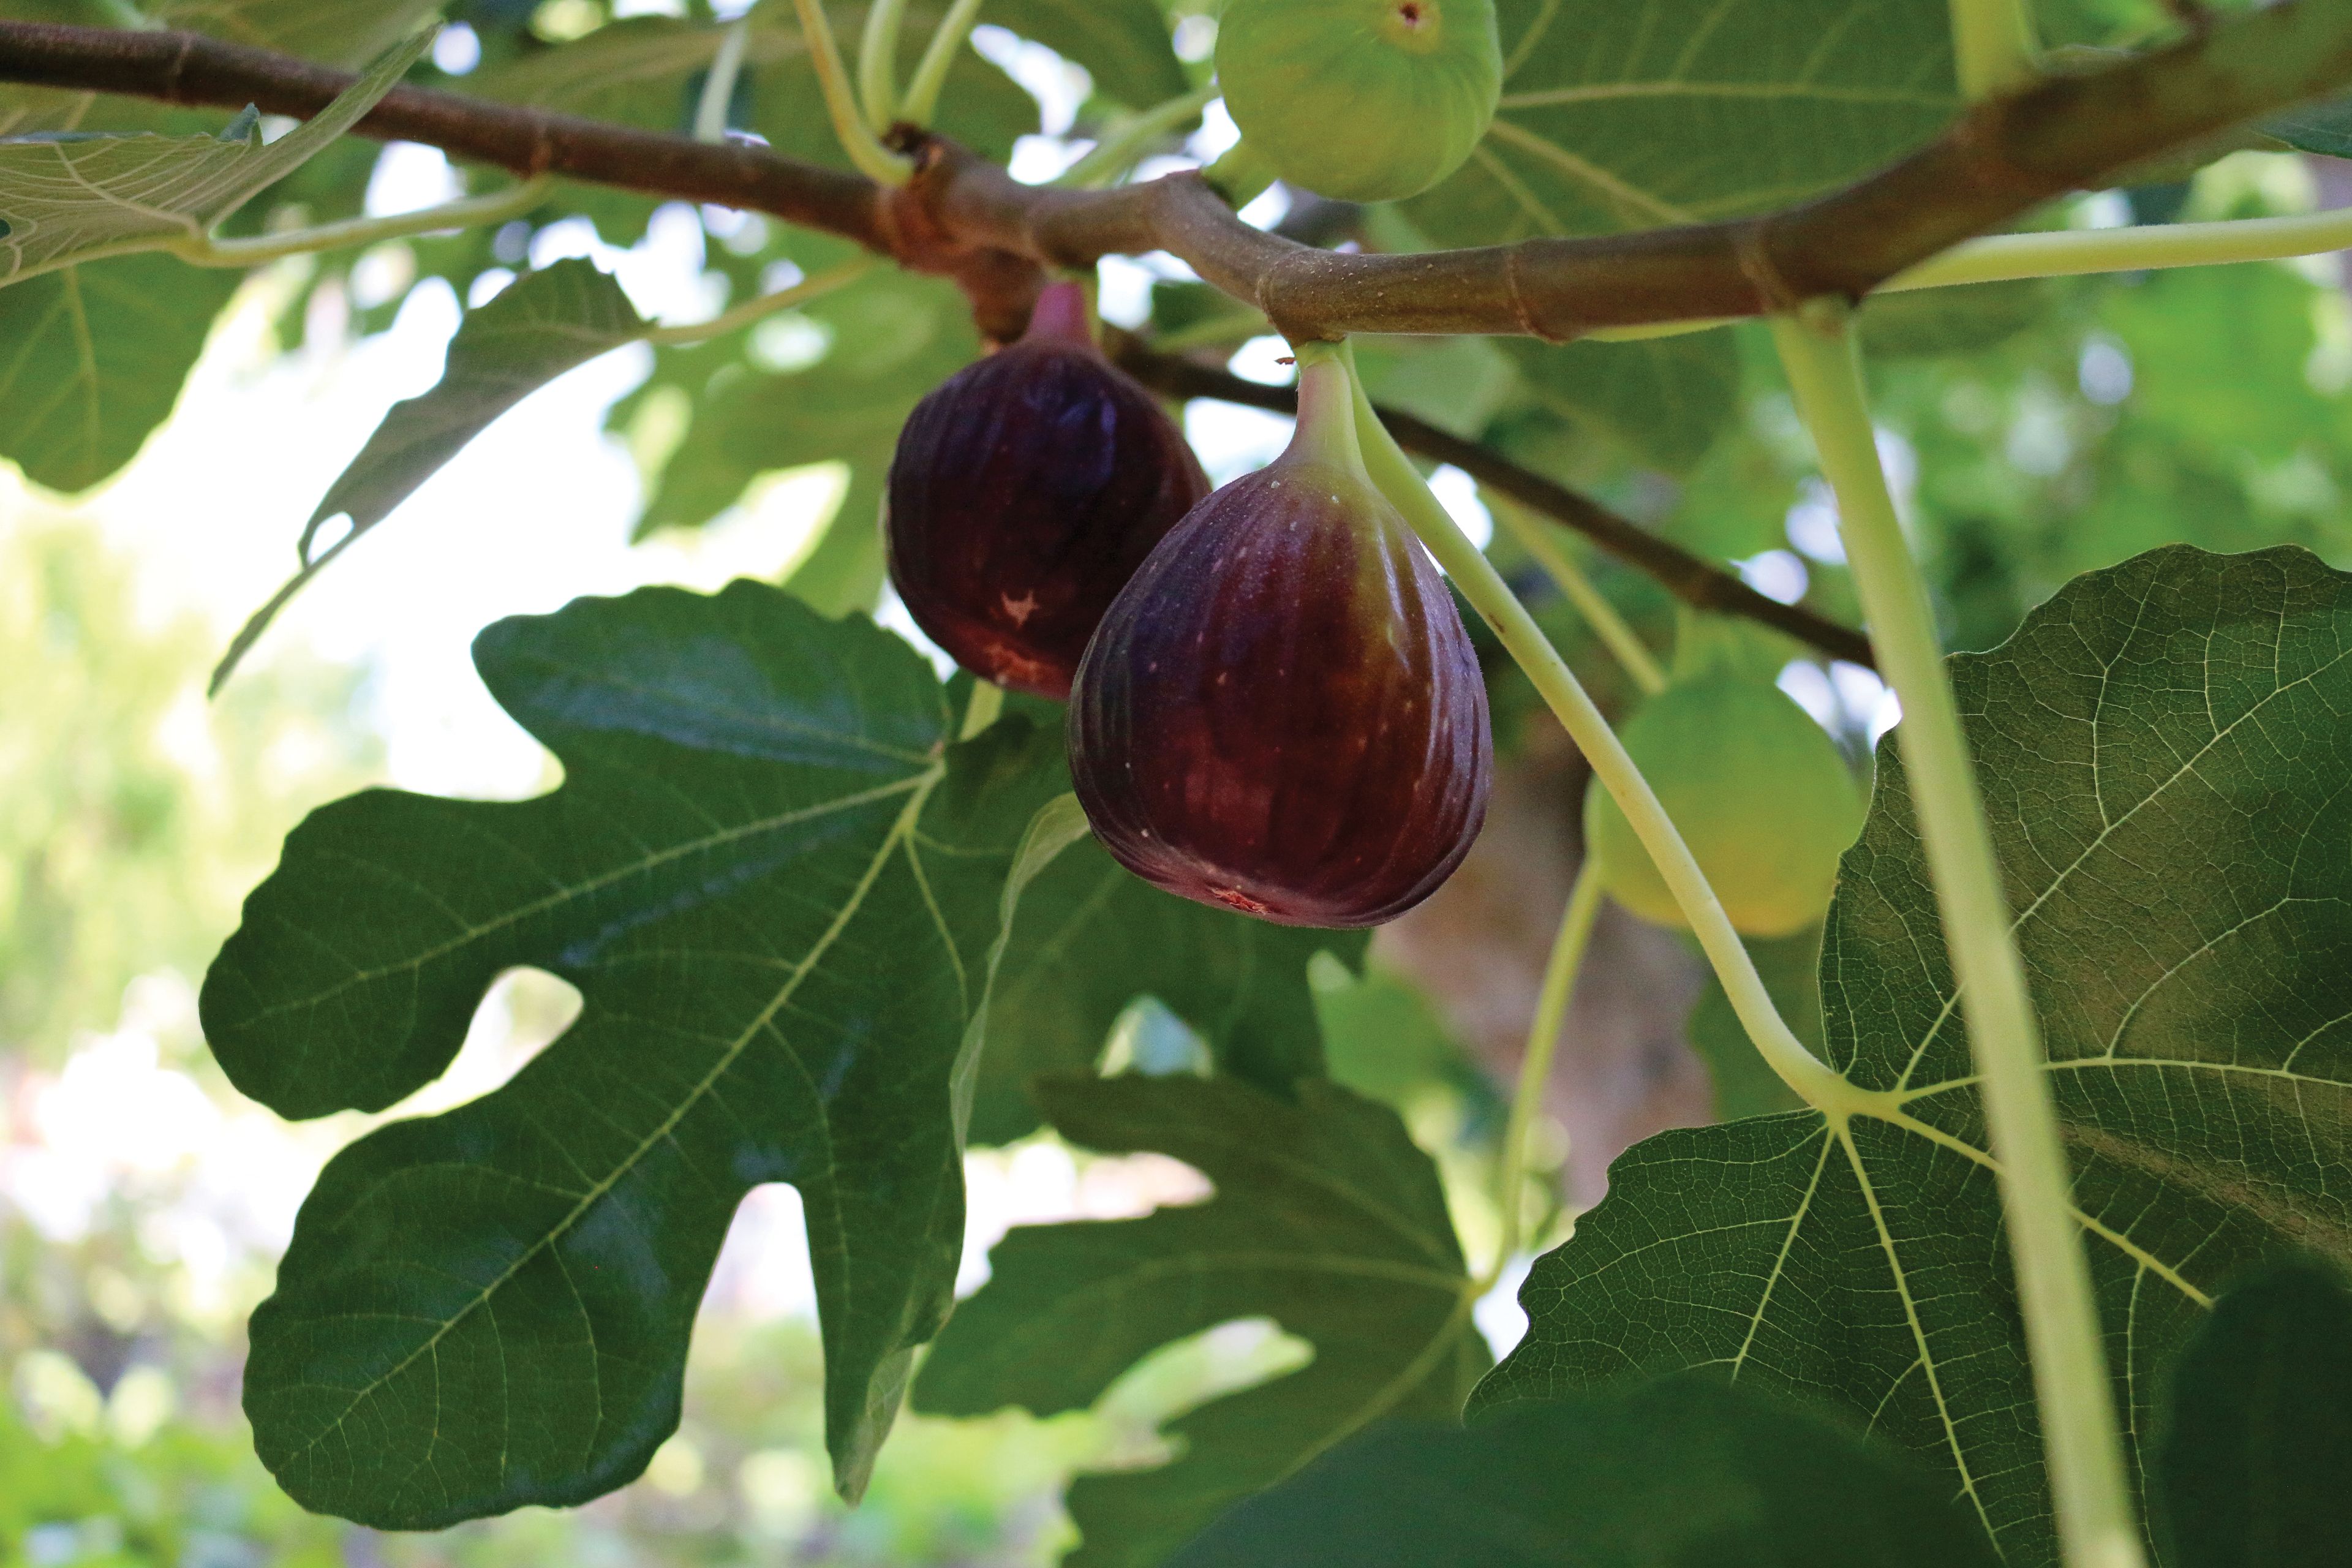 Two figs growing on a branch.